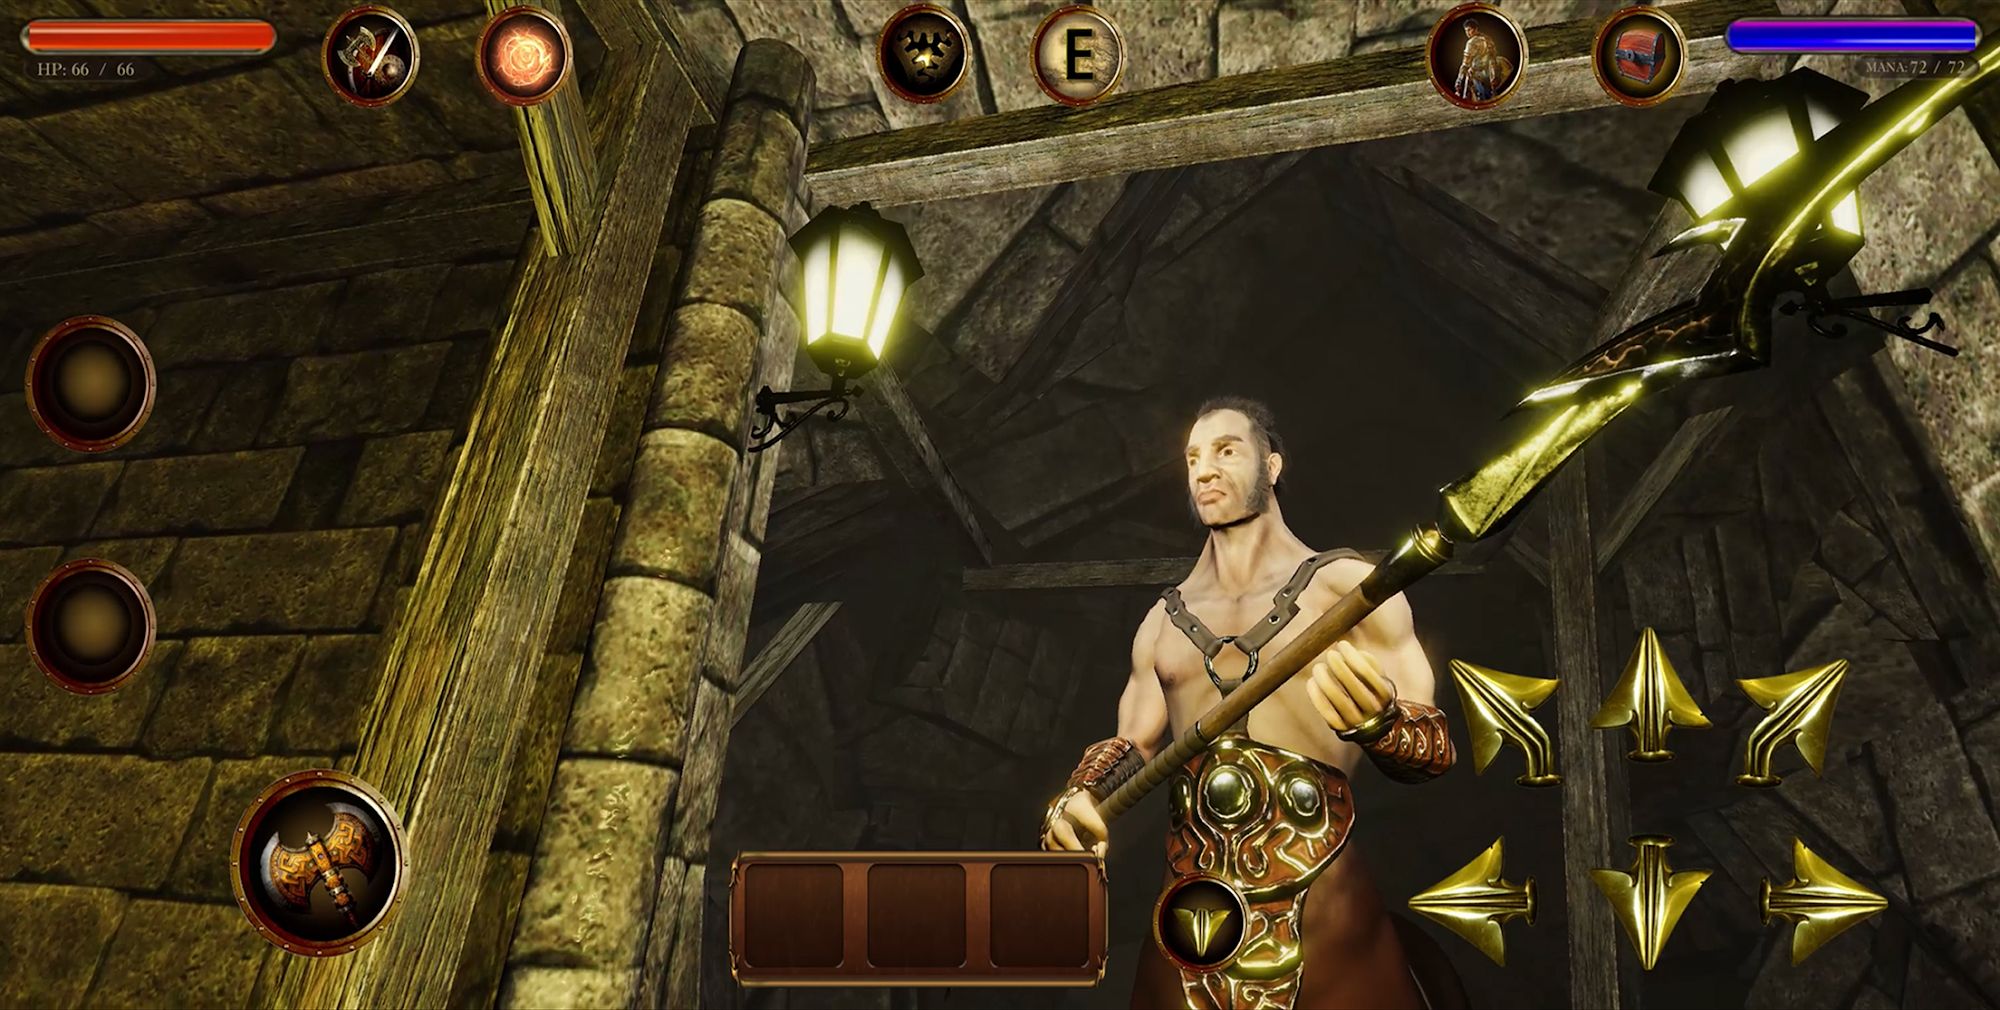 Full version of Android apk app Dungeon Legends 2 - RPG Game for tablet and phone.